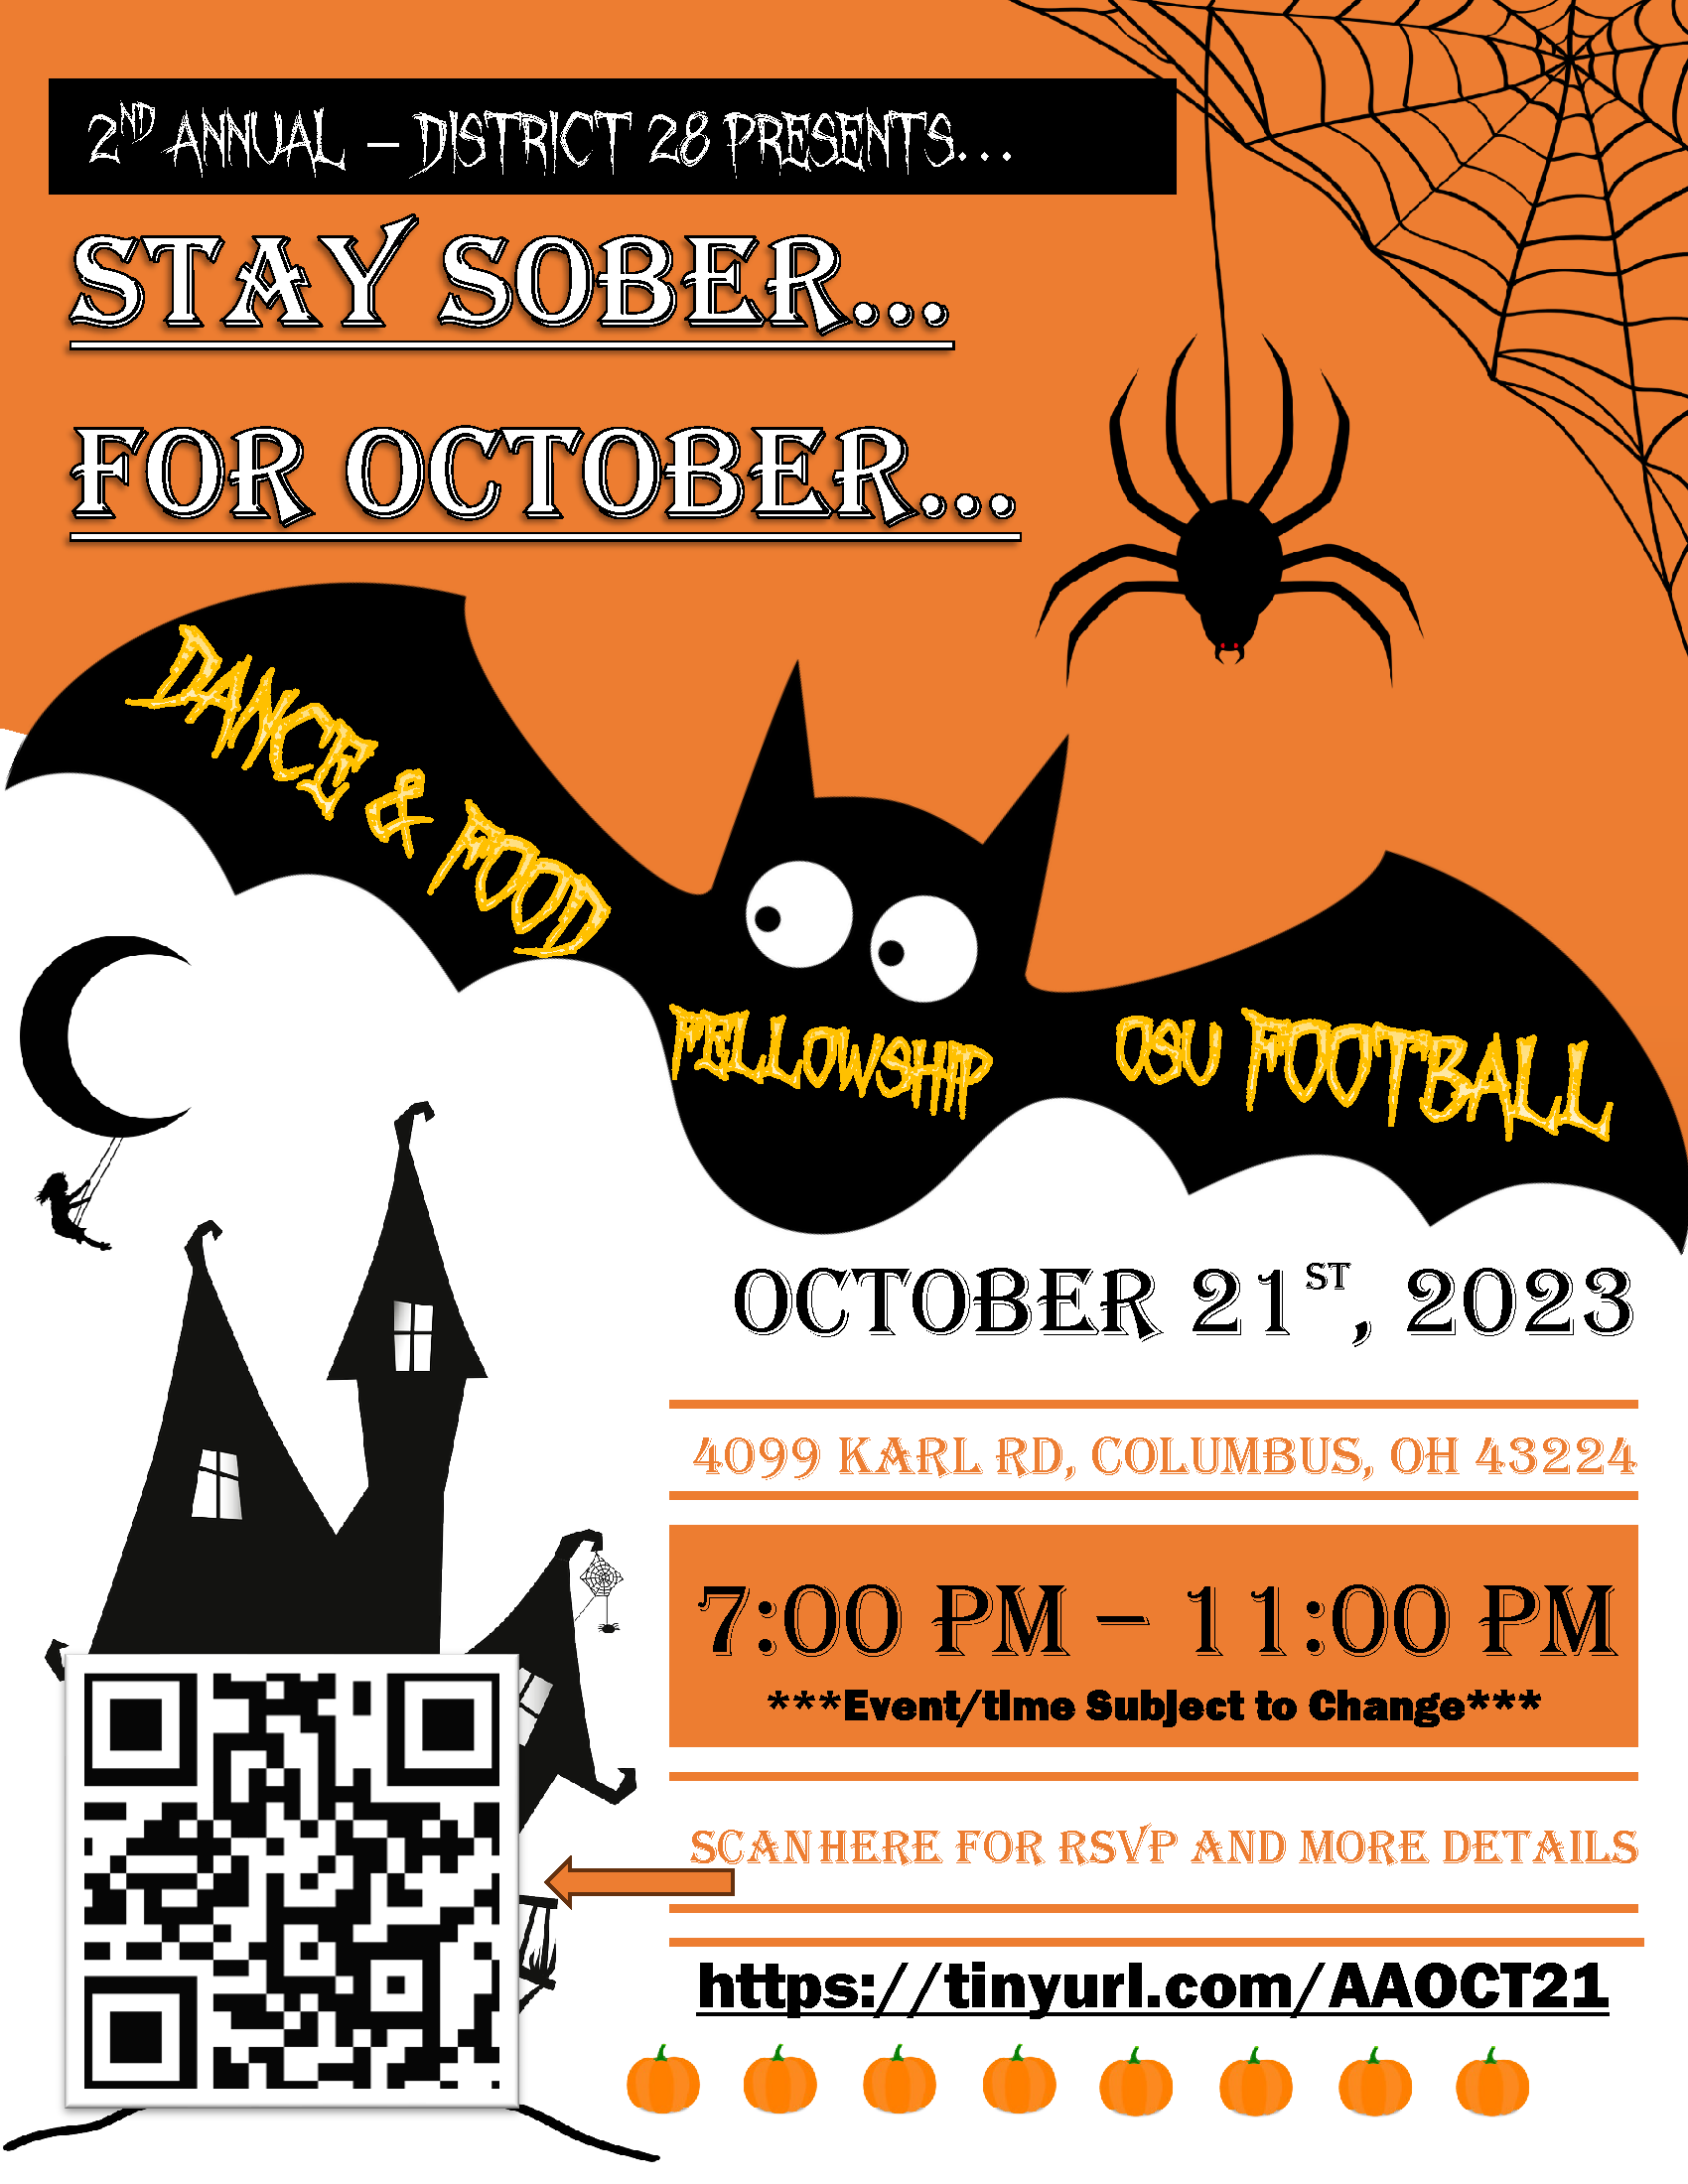 Stay Sober for October 21 2023